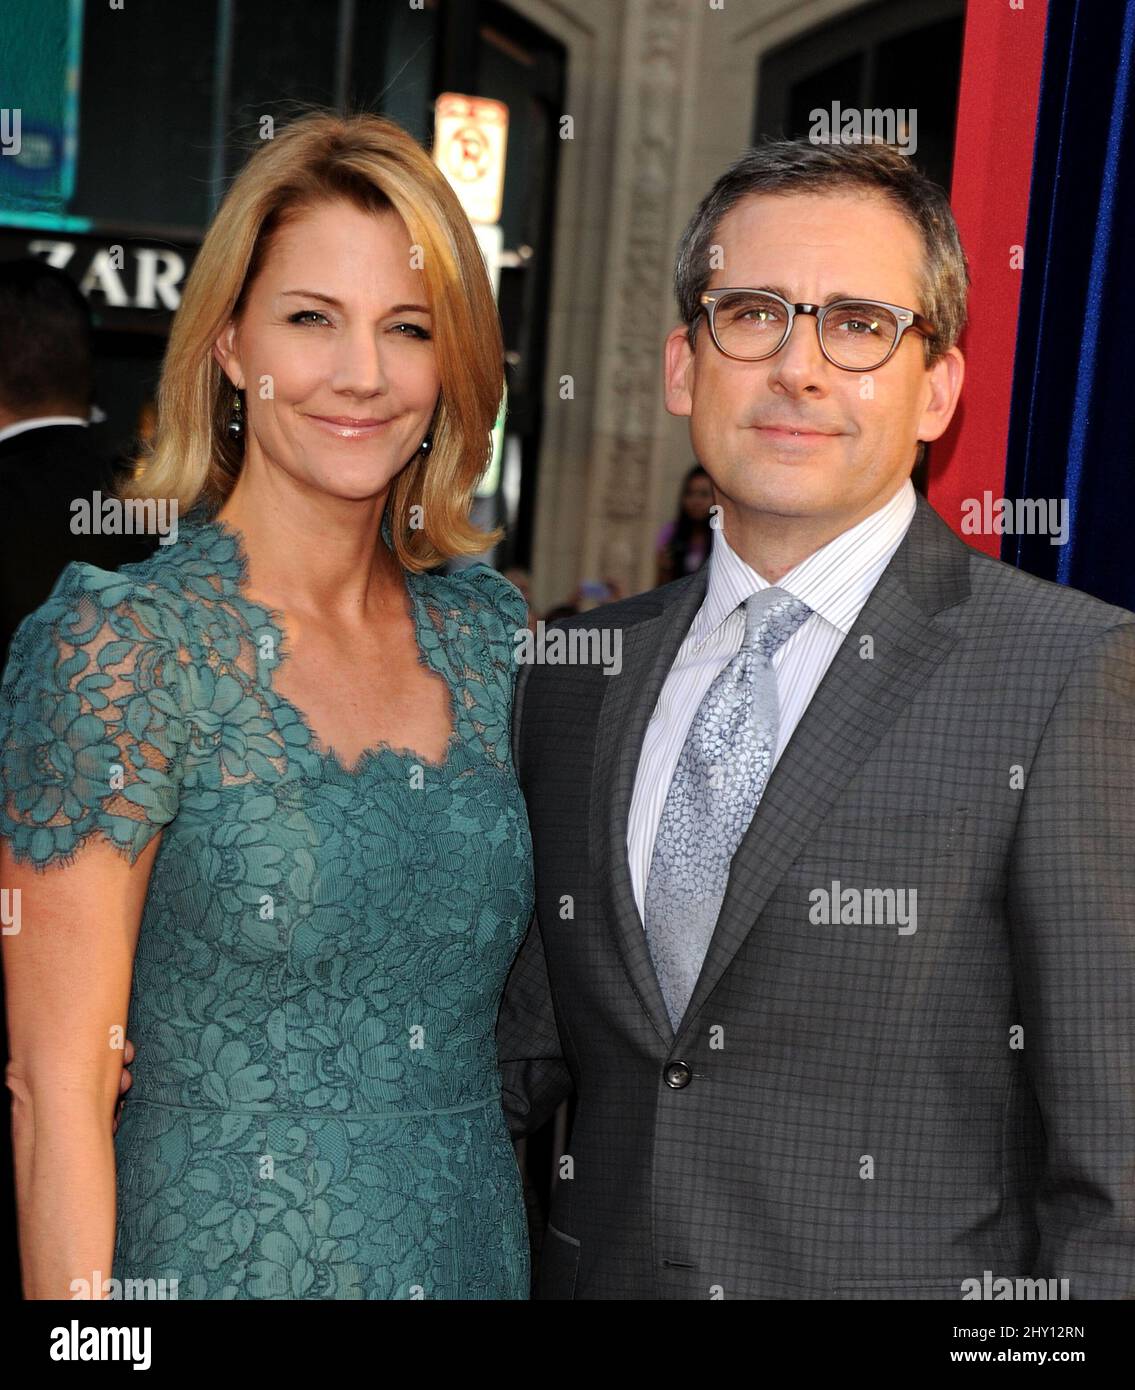 Steve Carell and his wife Nancy Walls attending "The Incredible Burt Wonderstone" World Premiere held at the Chinese Theatre in Los Angeles, USA. Stock Photo